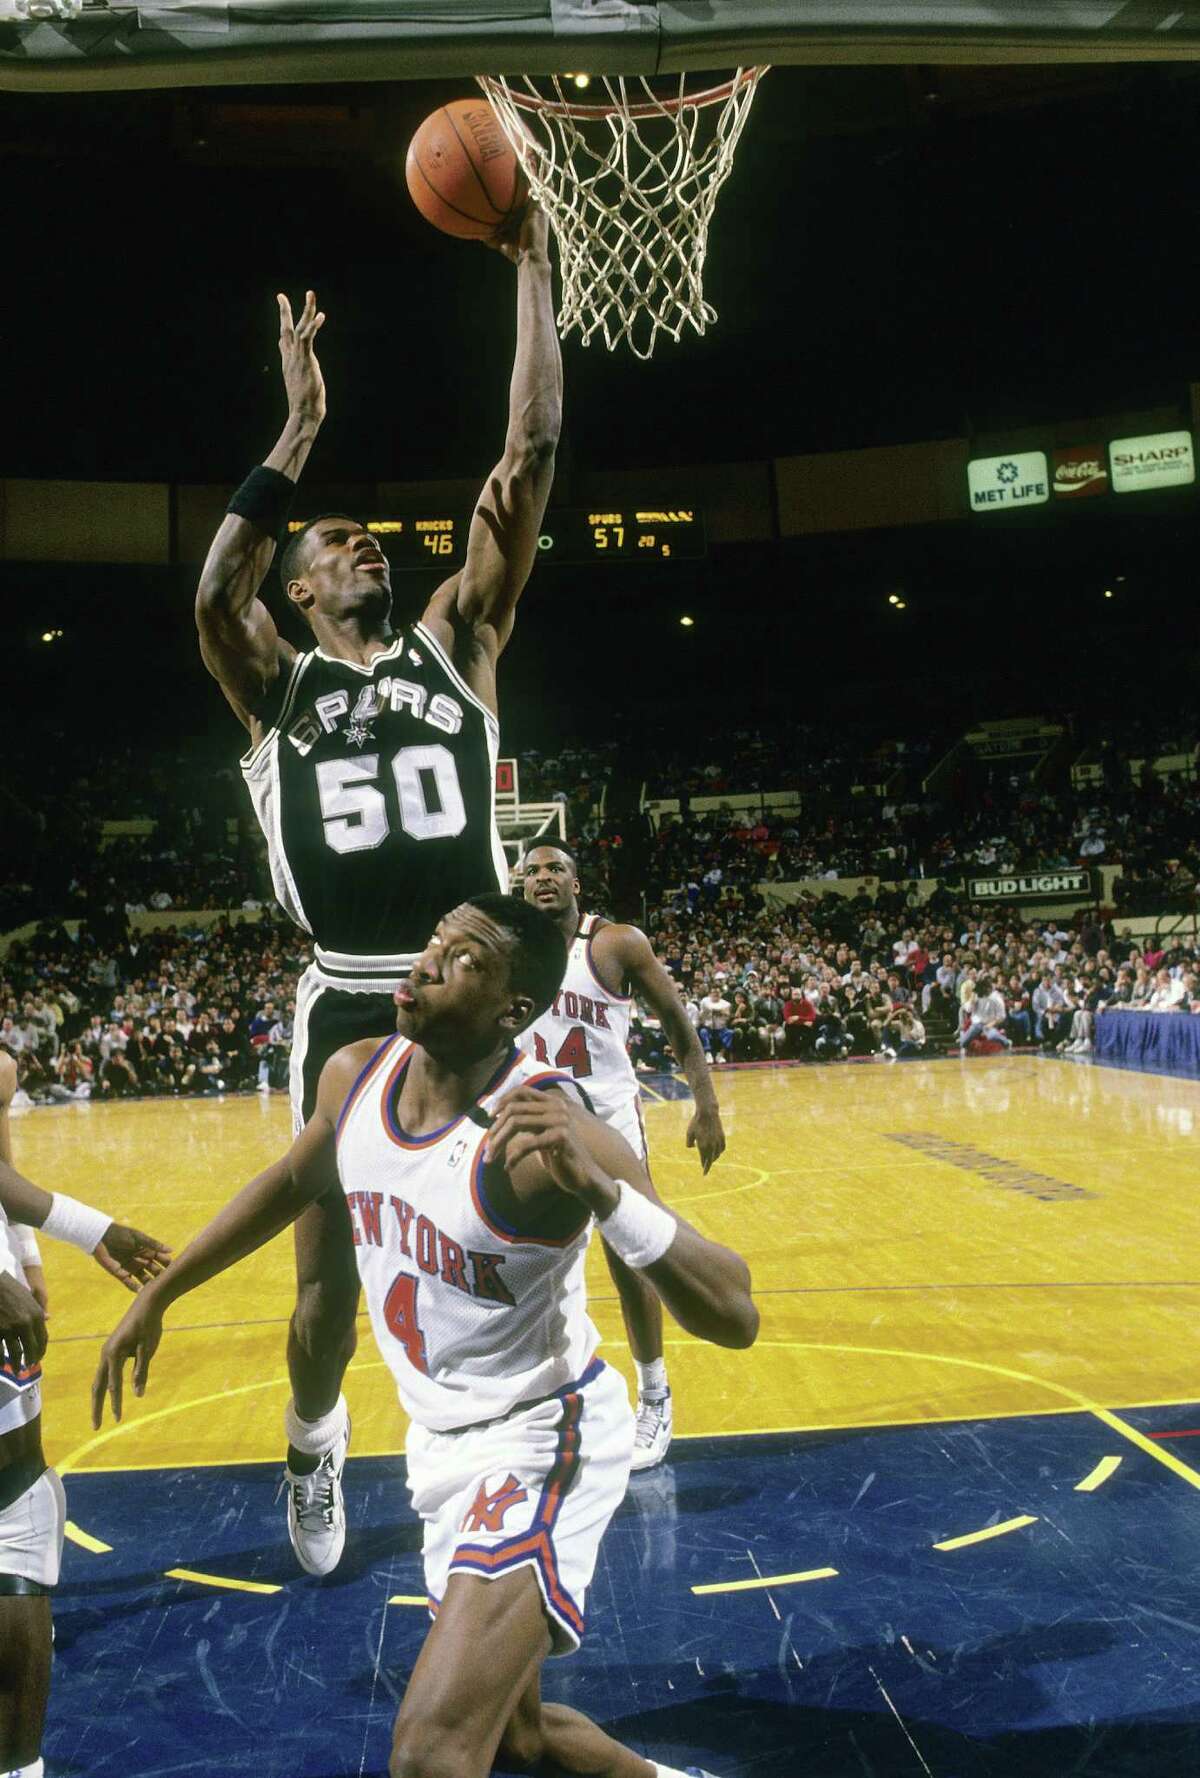 David Robinson of the San Antonio Spurs shoots over Anthony Bonner of the New York Knicks during a mid-circa 1990s game at Madison Square Garden in New York. Robinson played for the Spurs from 1989-03.